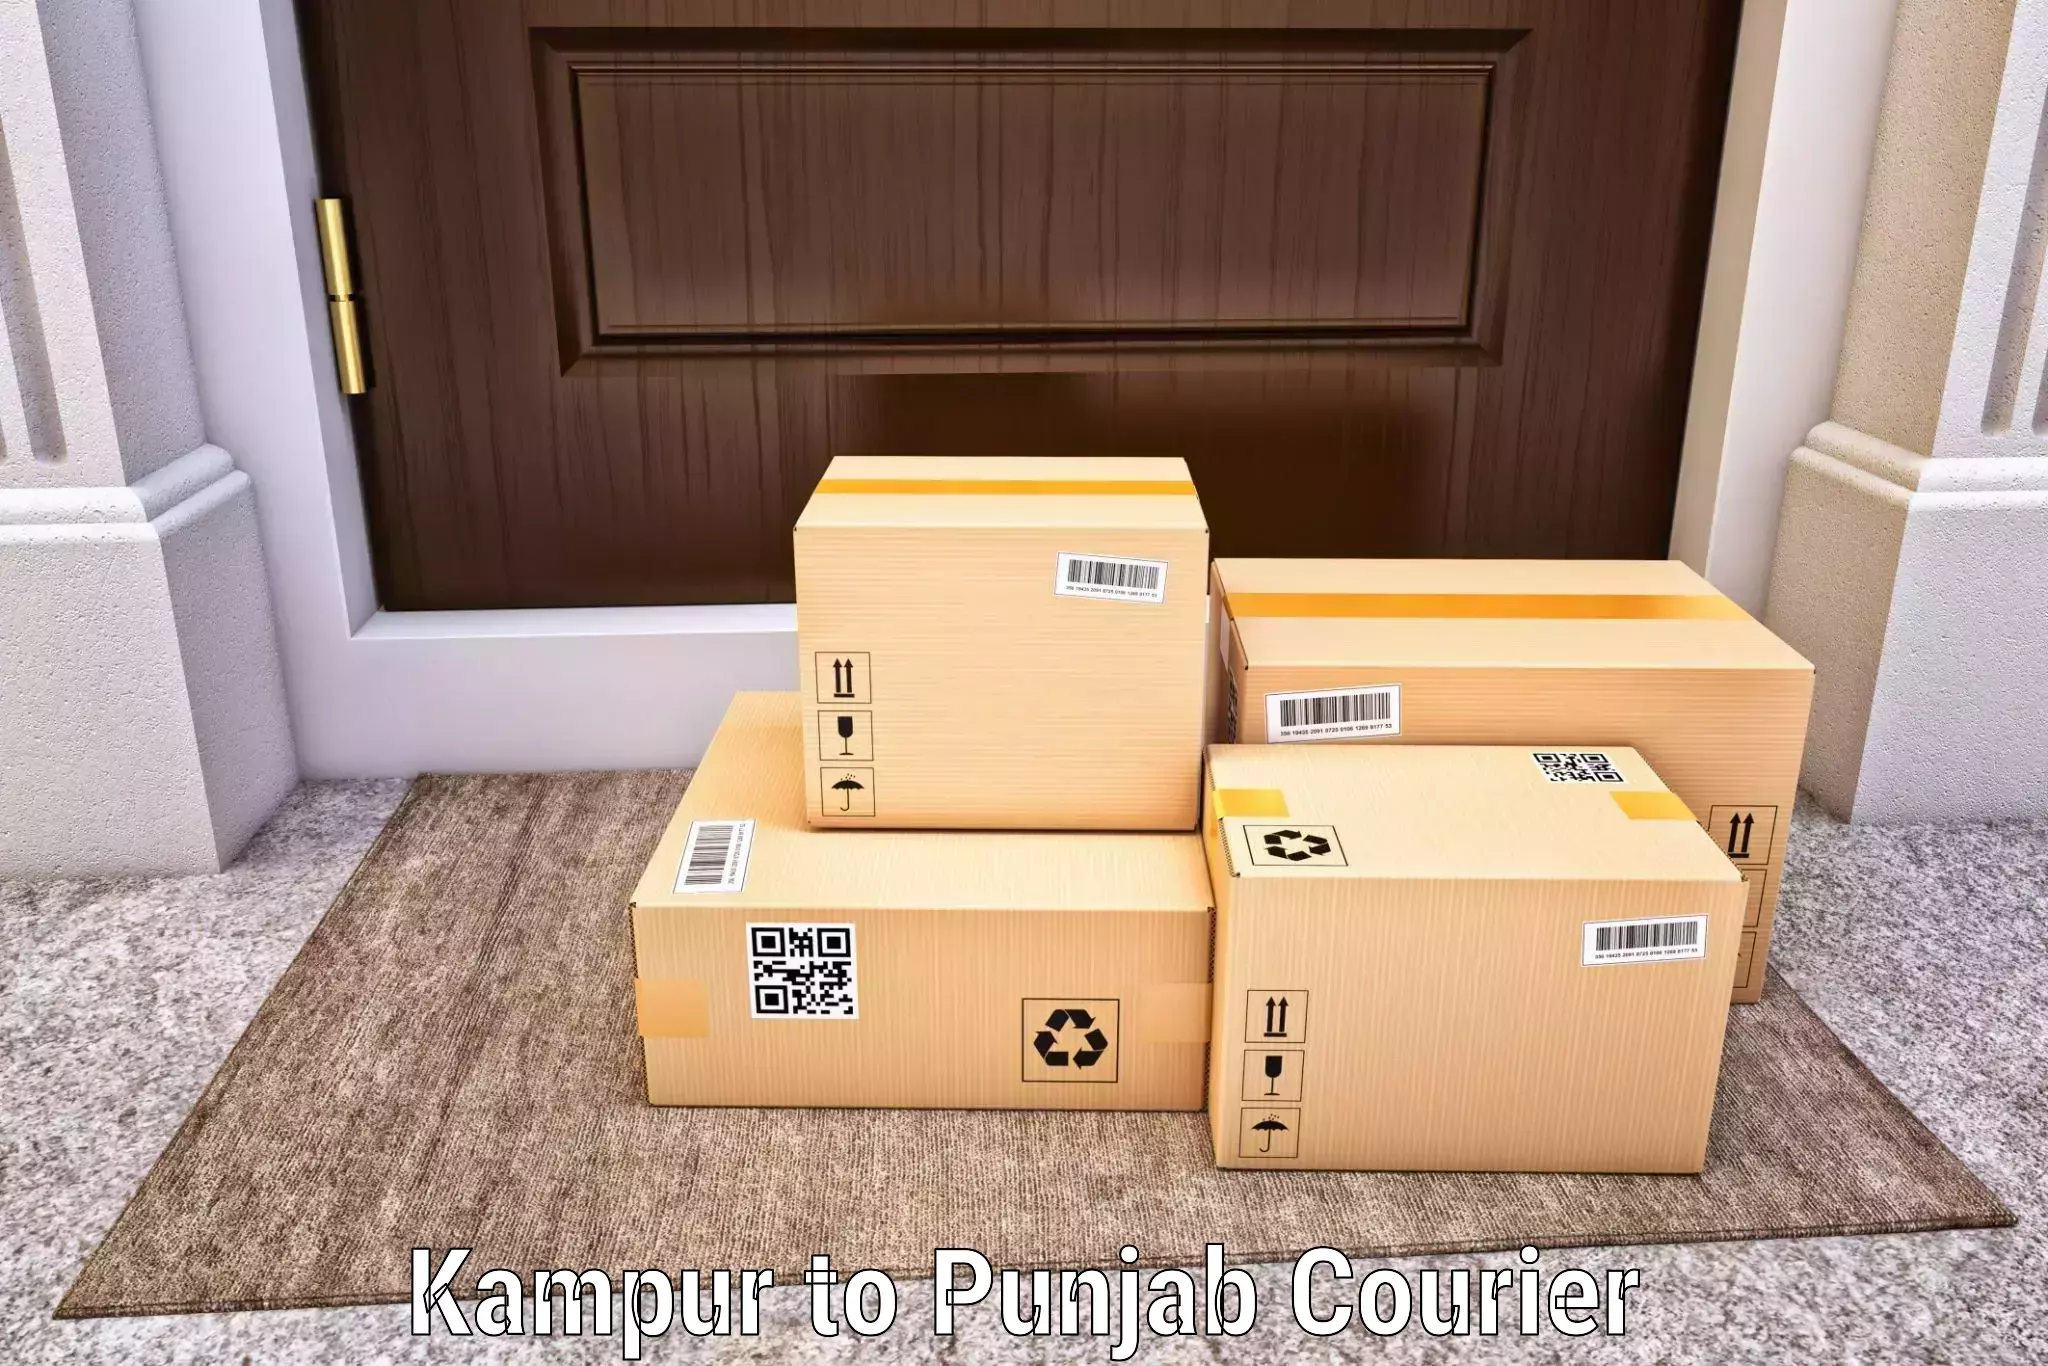 Courier service innovation Kampur to Punjab